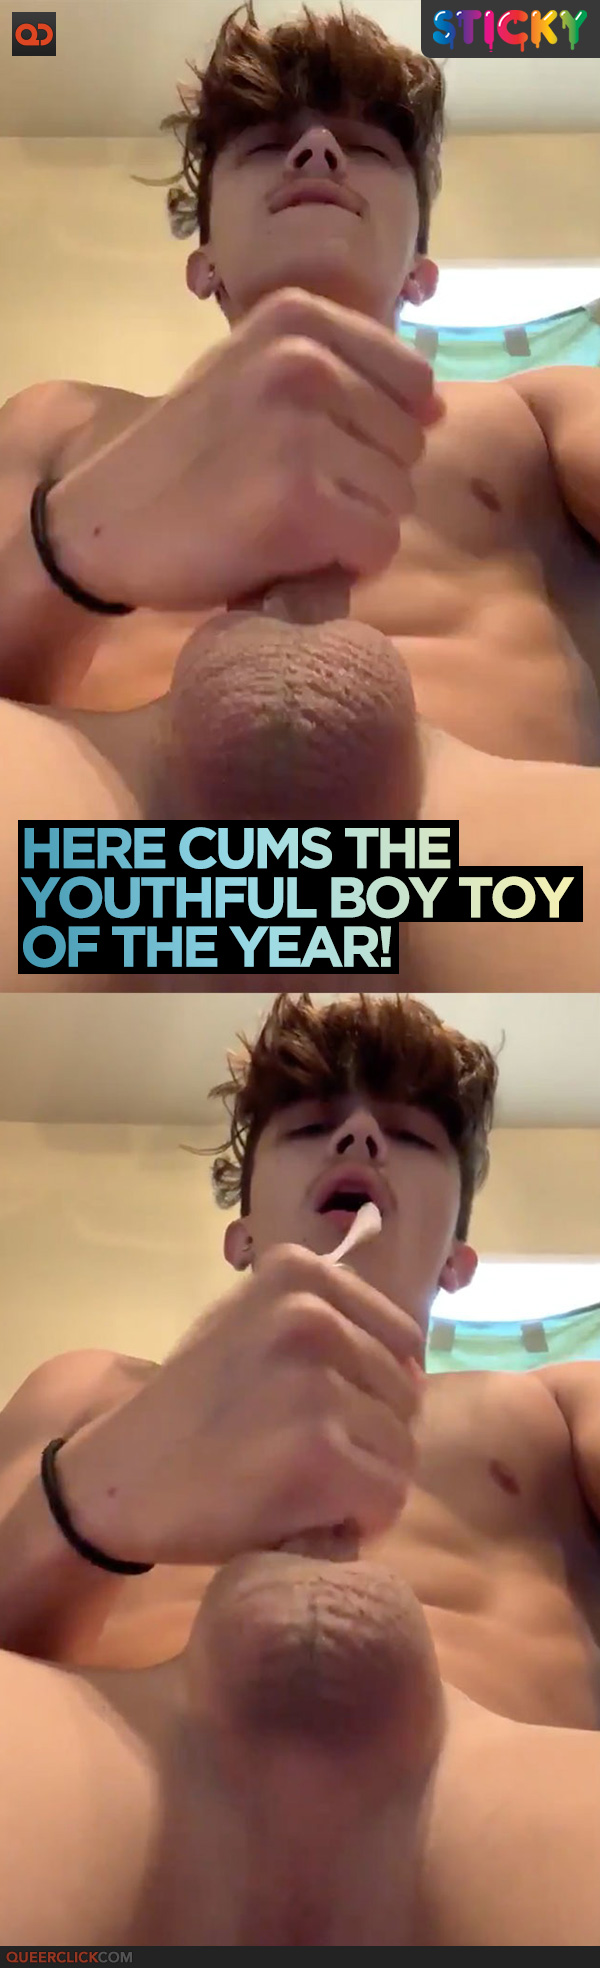 Here Cums The Youthful Boy Toy Of The Year!